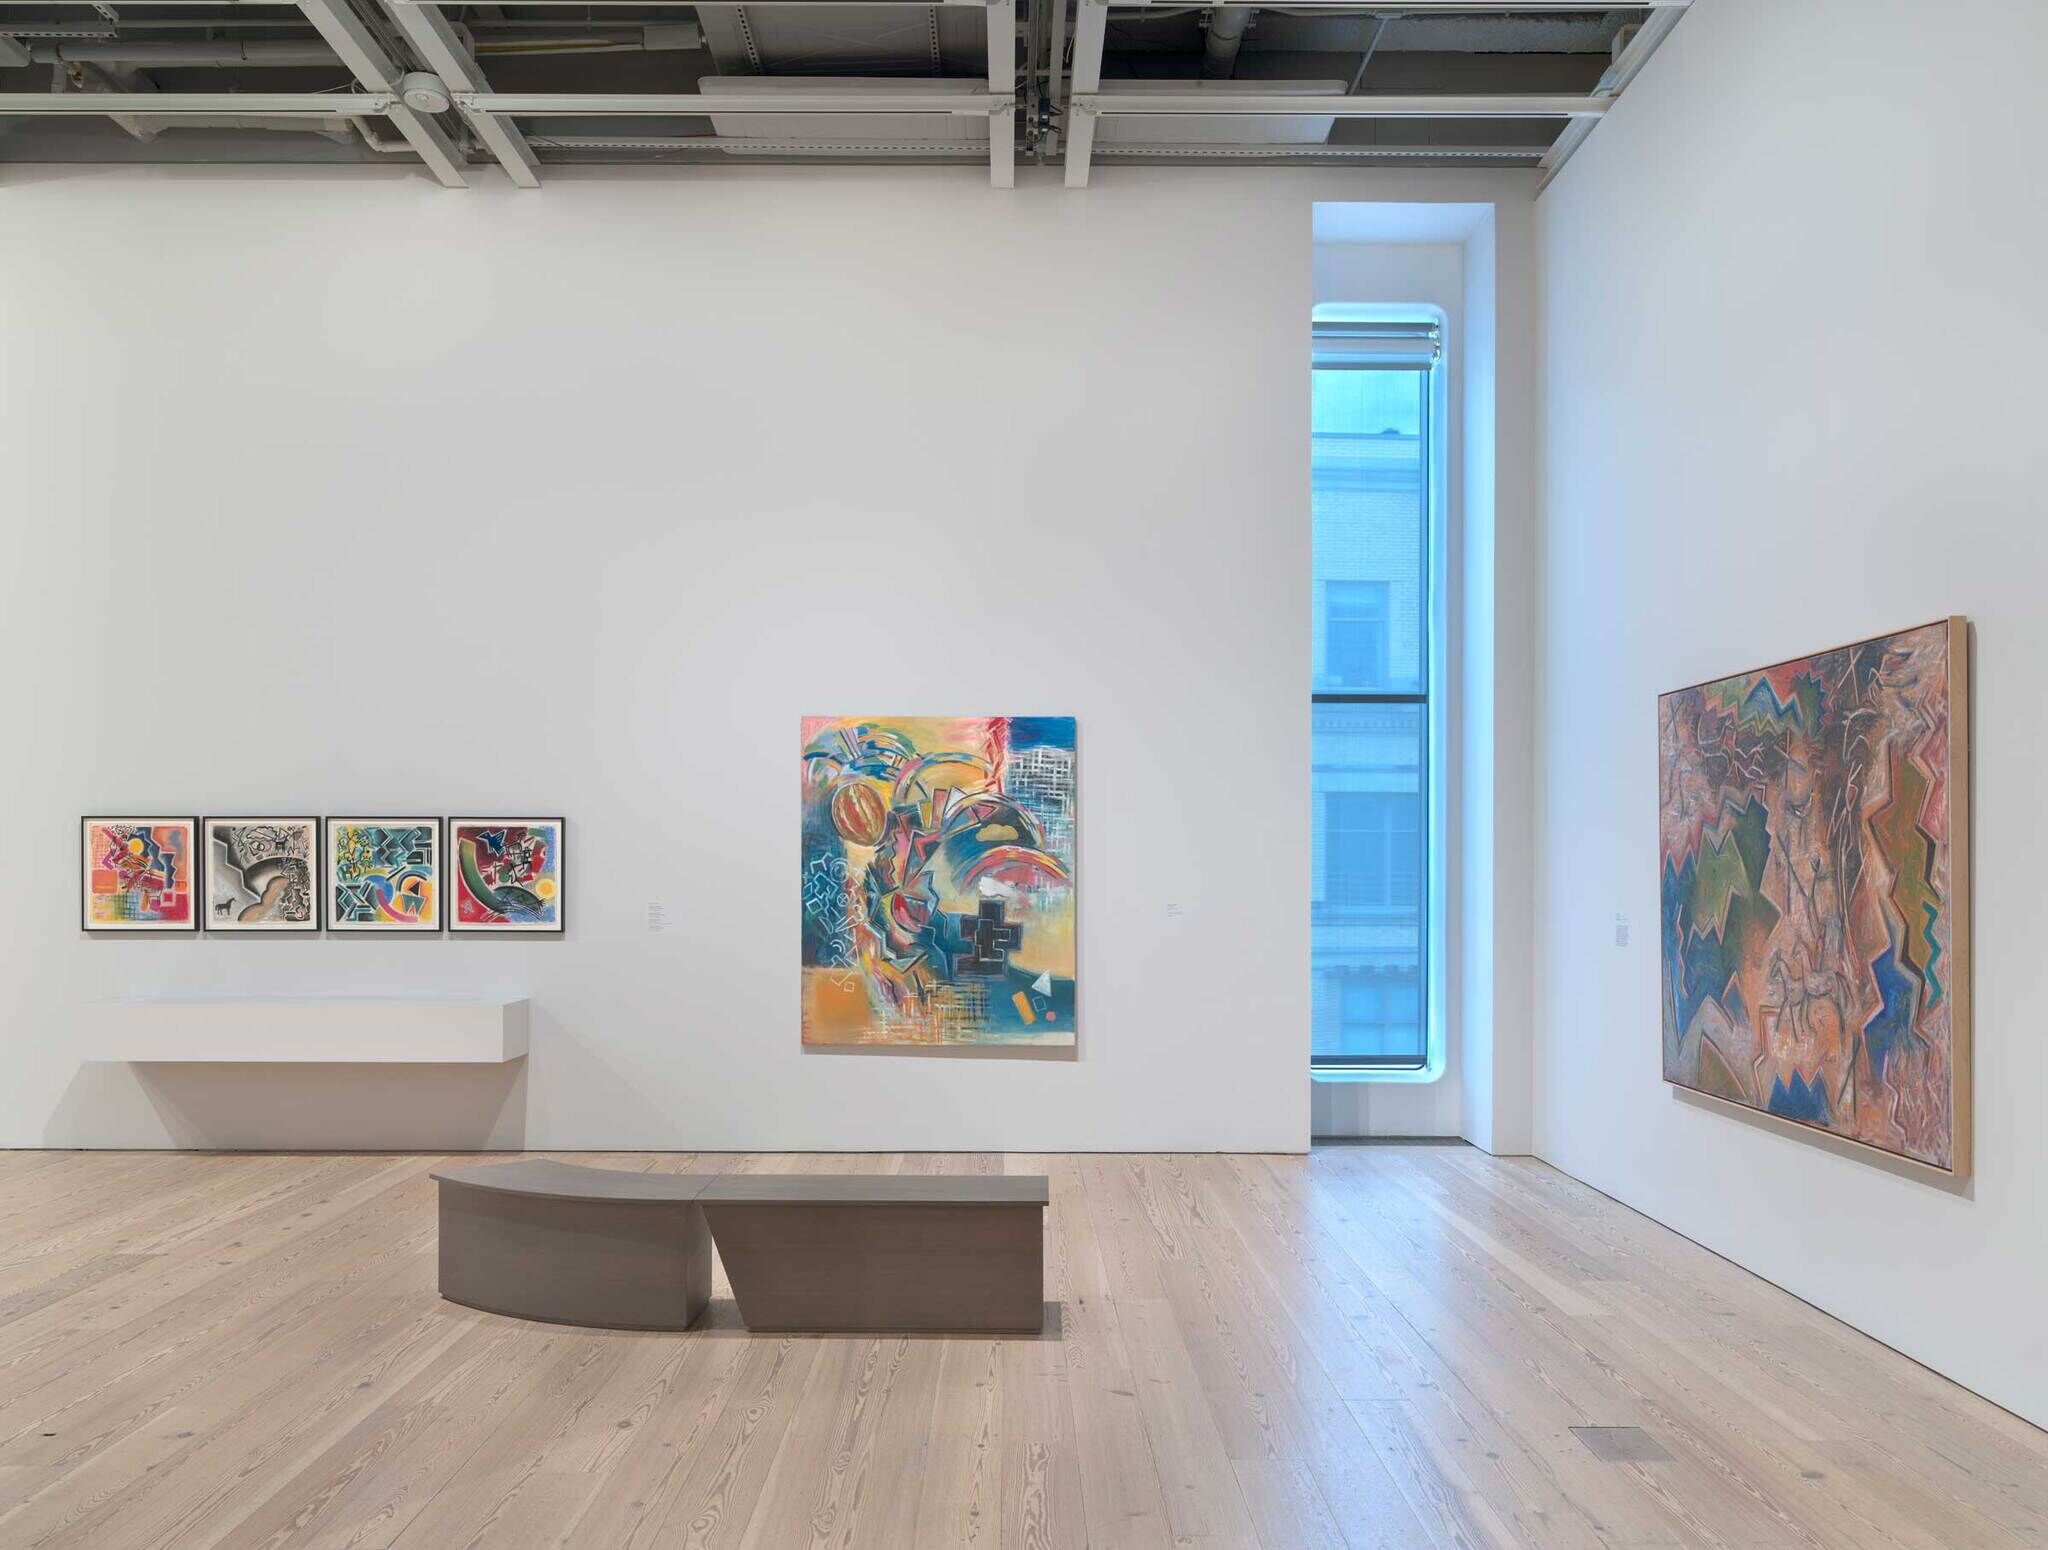 From left to right: four small color abstract paintings, a larger blue and yellow and pink abstract painting, and on the right, a landscape abstract painting.